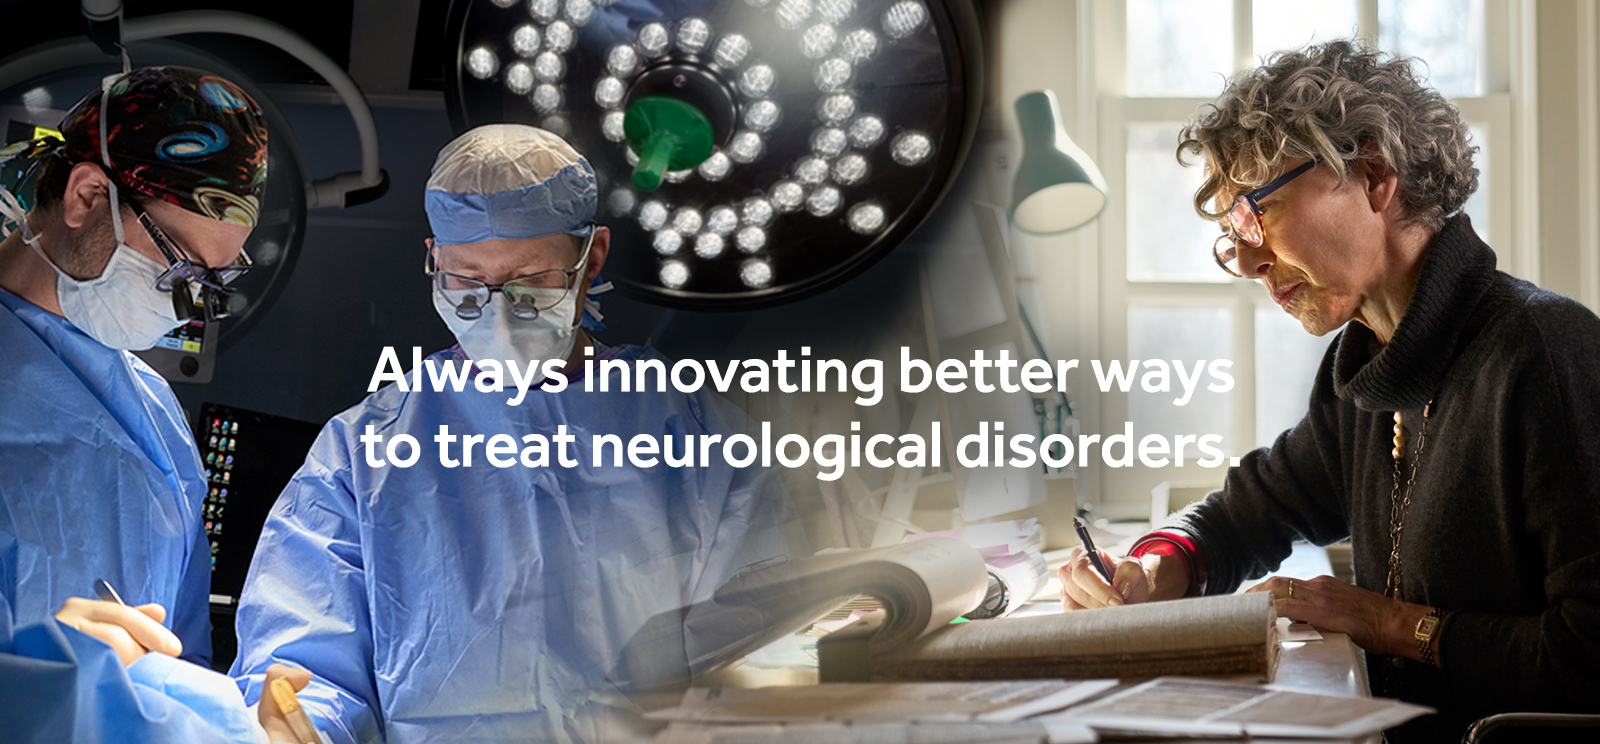 Always innovating better ways to treat neurological disorders.